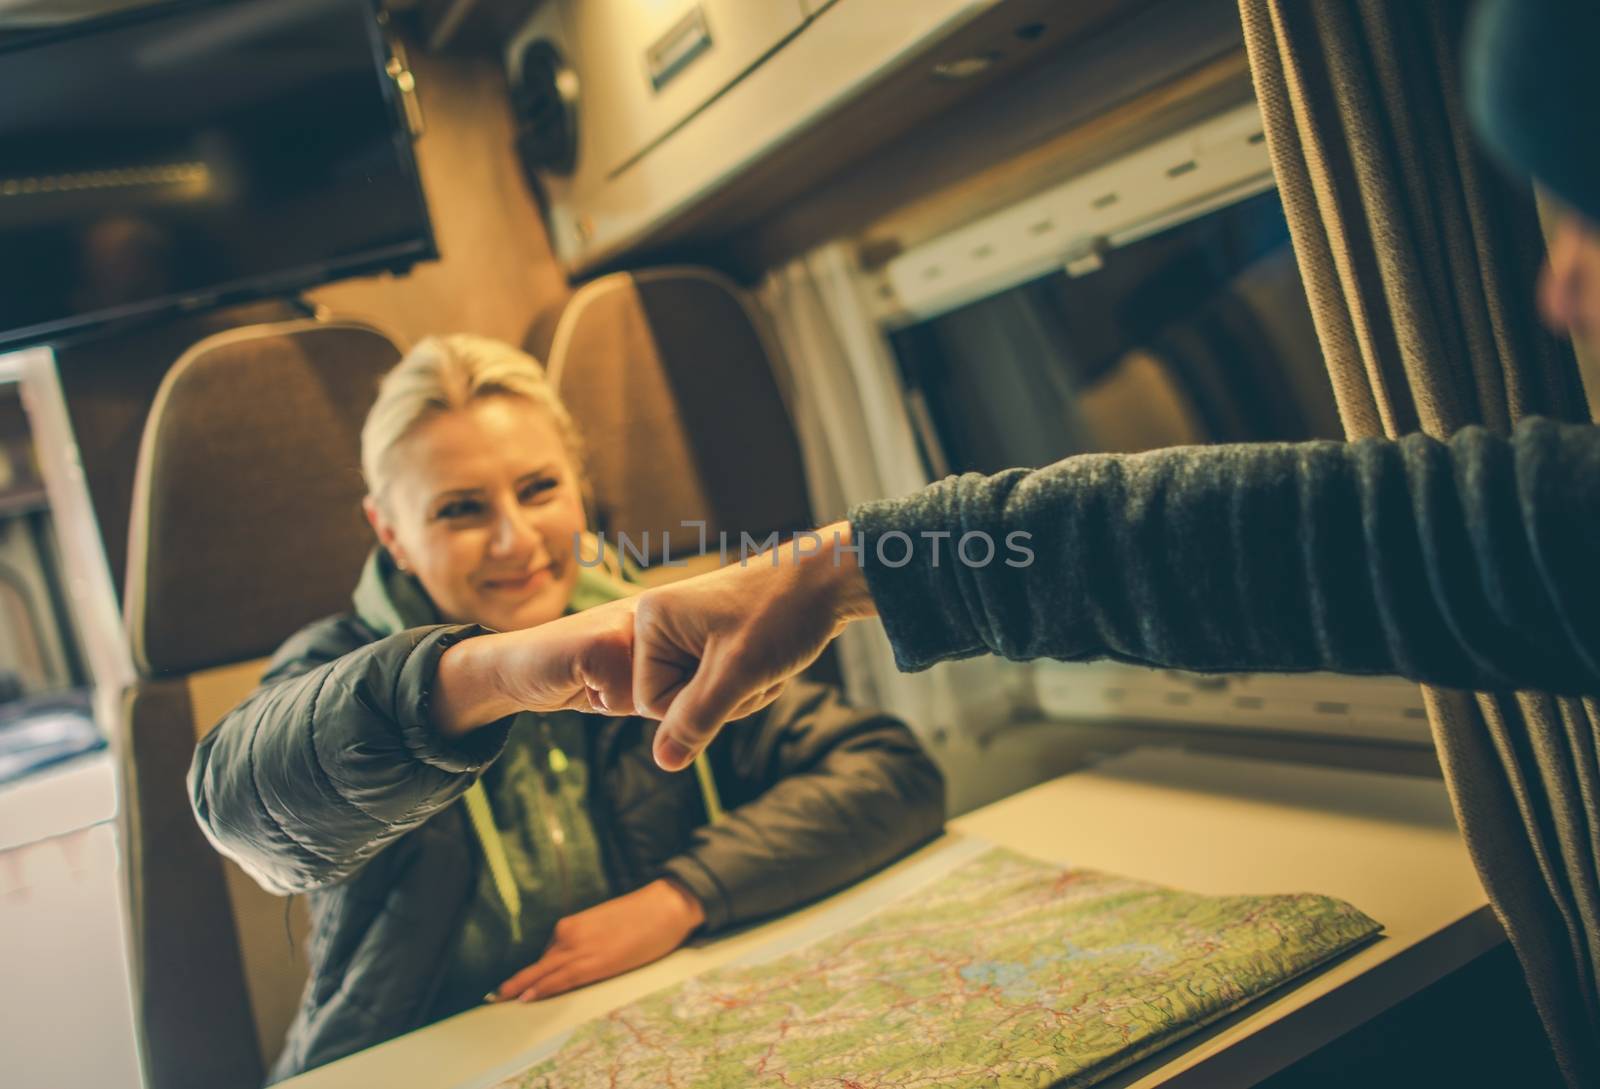 Approved RV Trip Fist Bump by welcomia